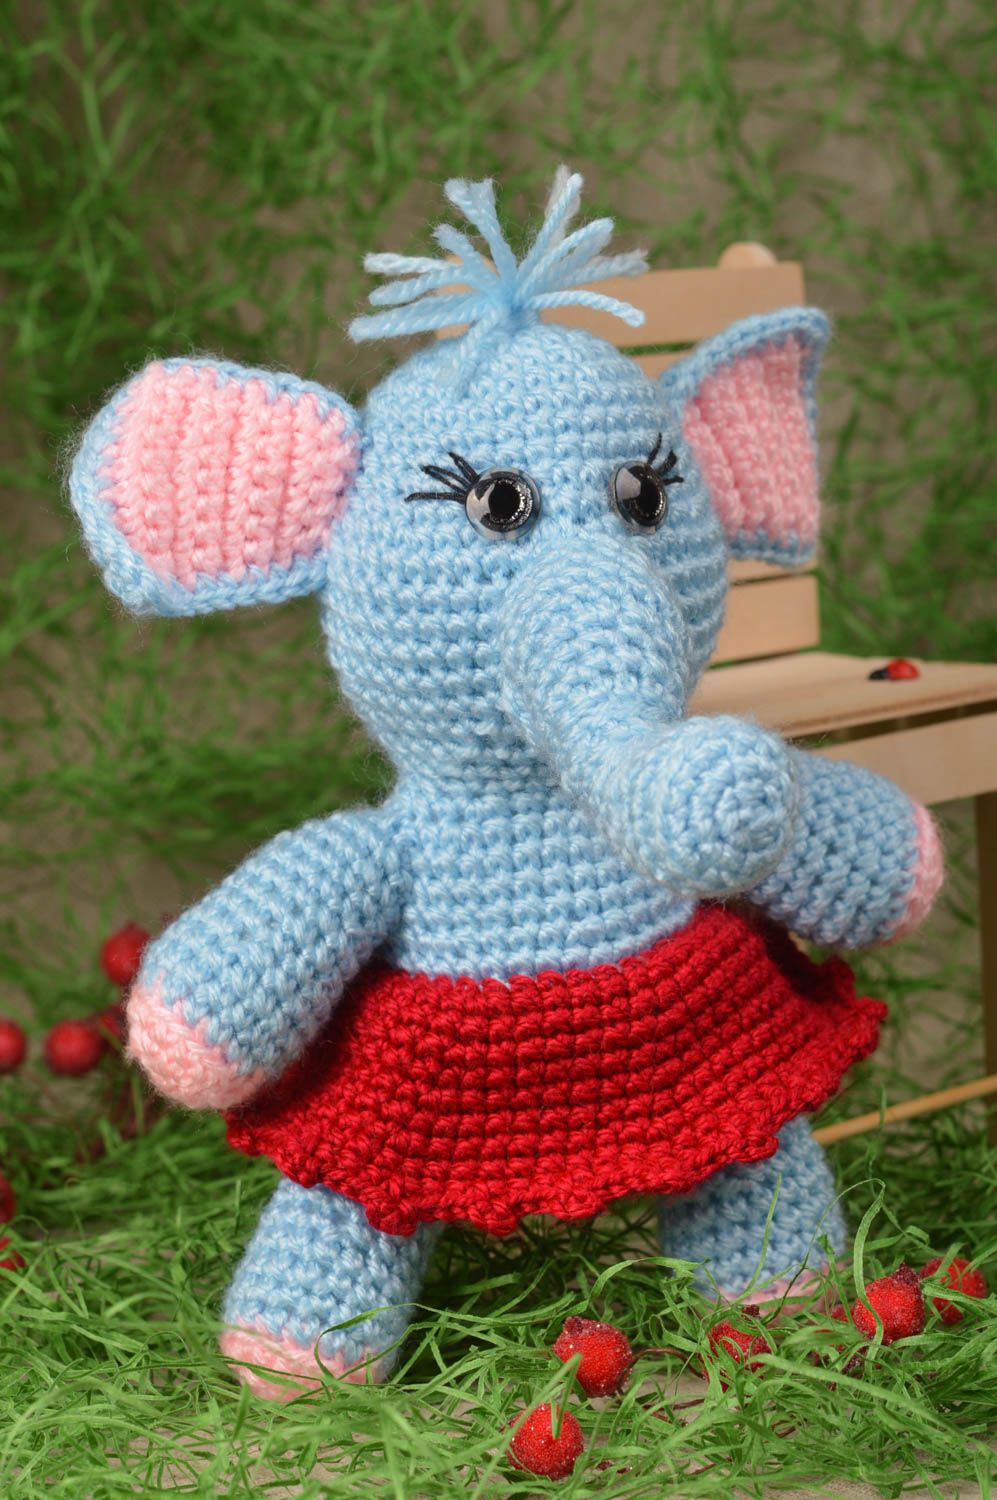 Handmade toy crocheted toy designer toy animal toy gift for baby decor ideas photo 5